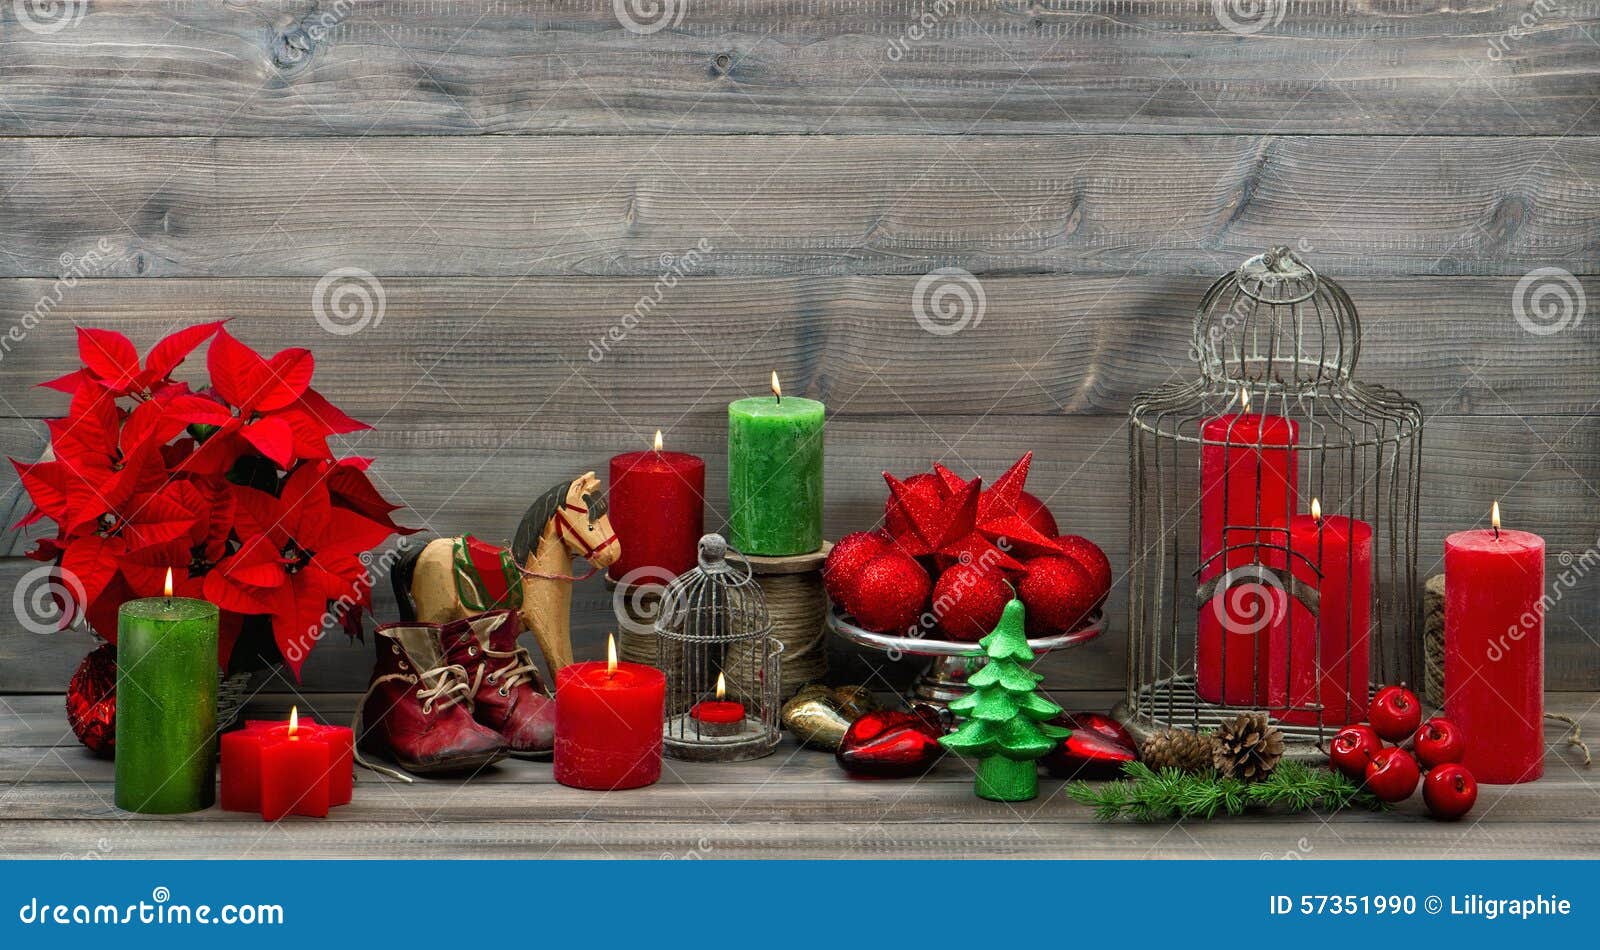  Vintage  Christmas  Decorations  With Red Candles And Flower 